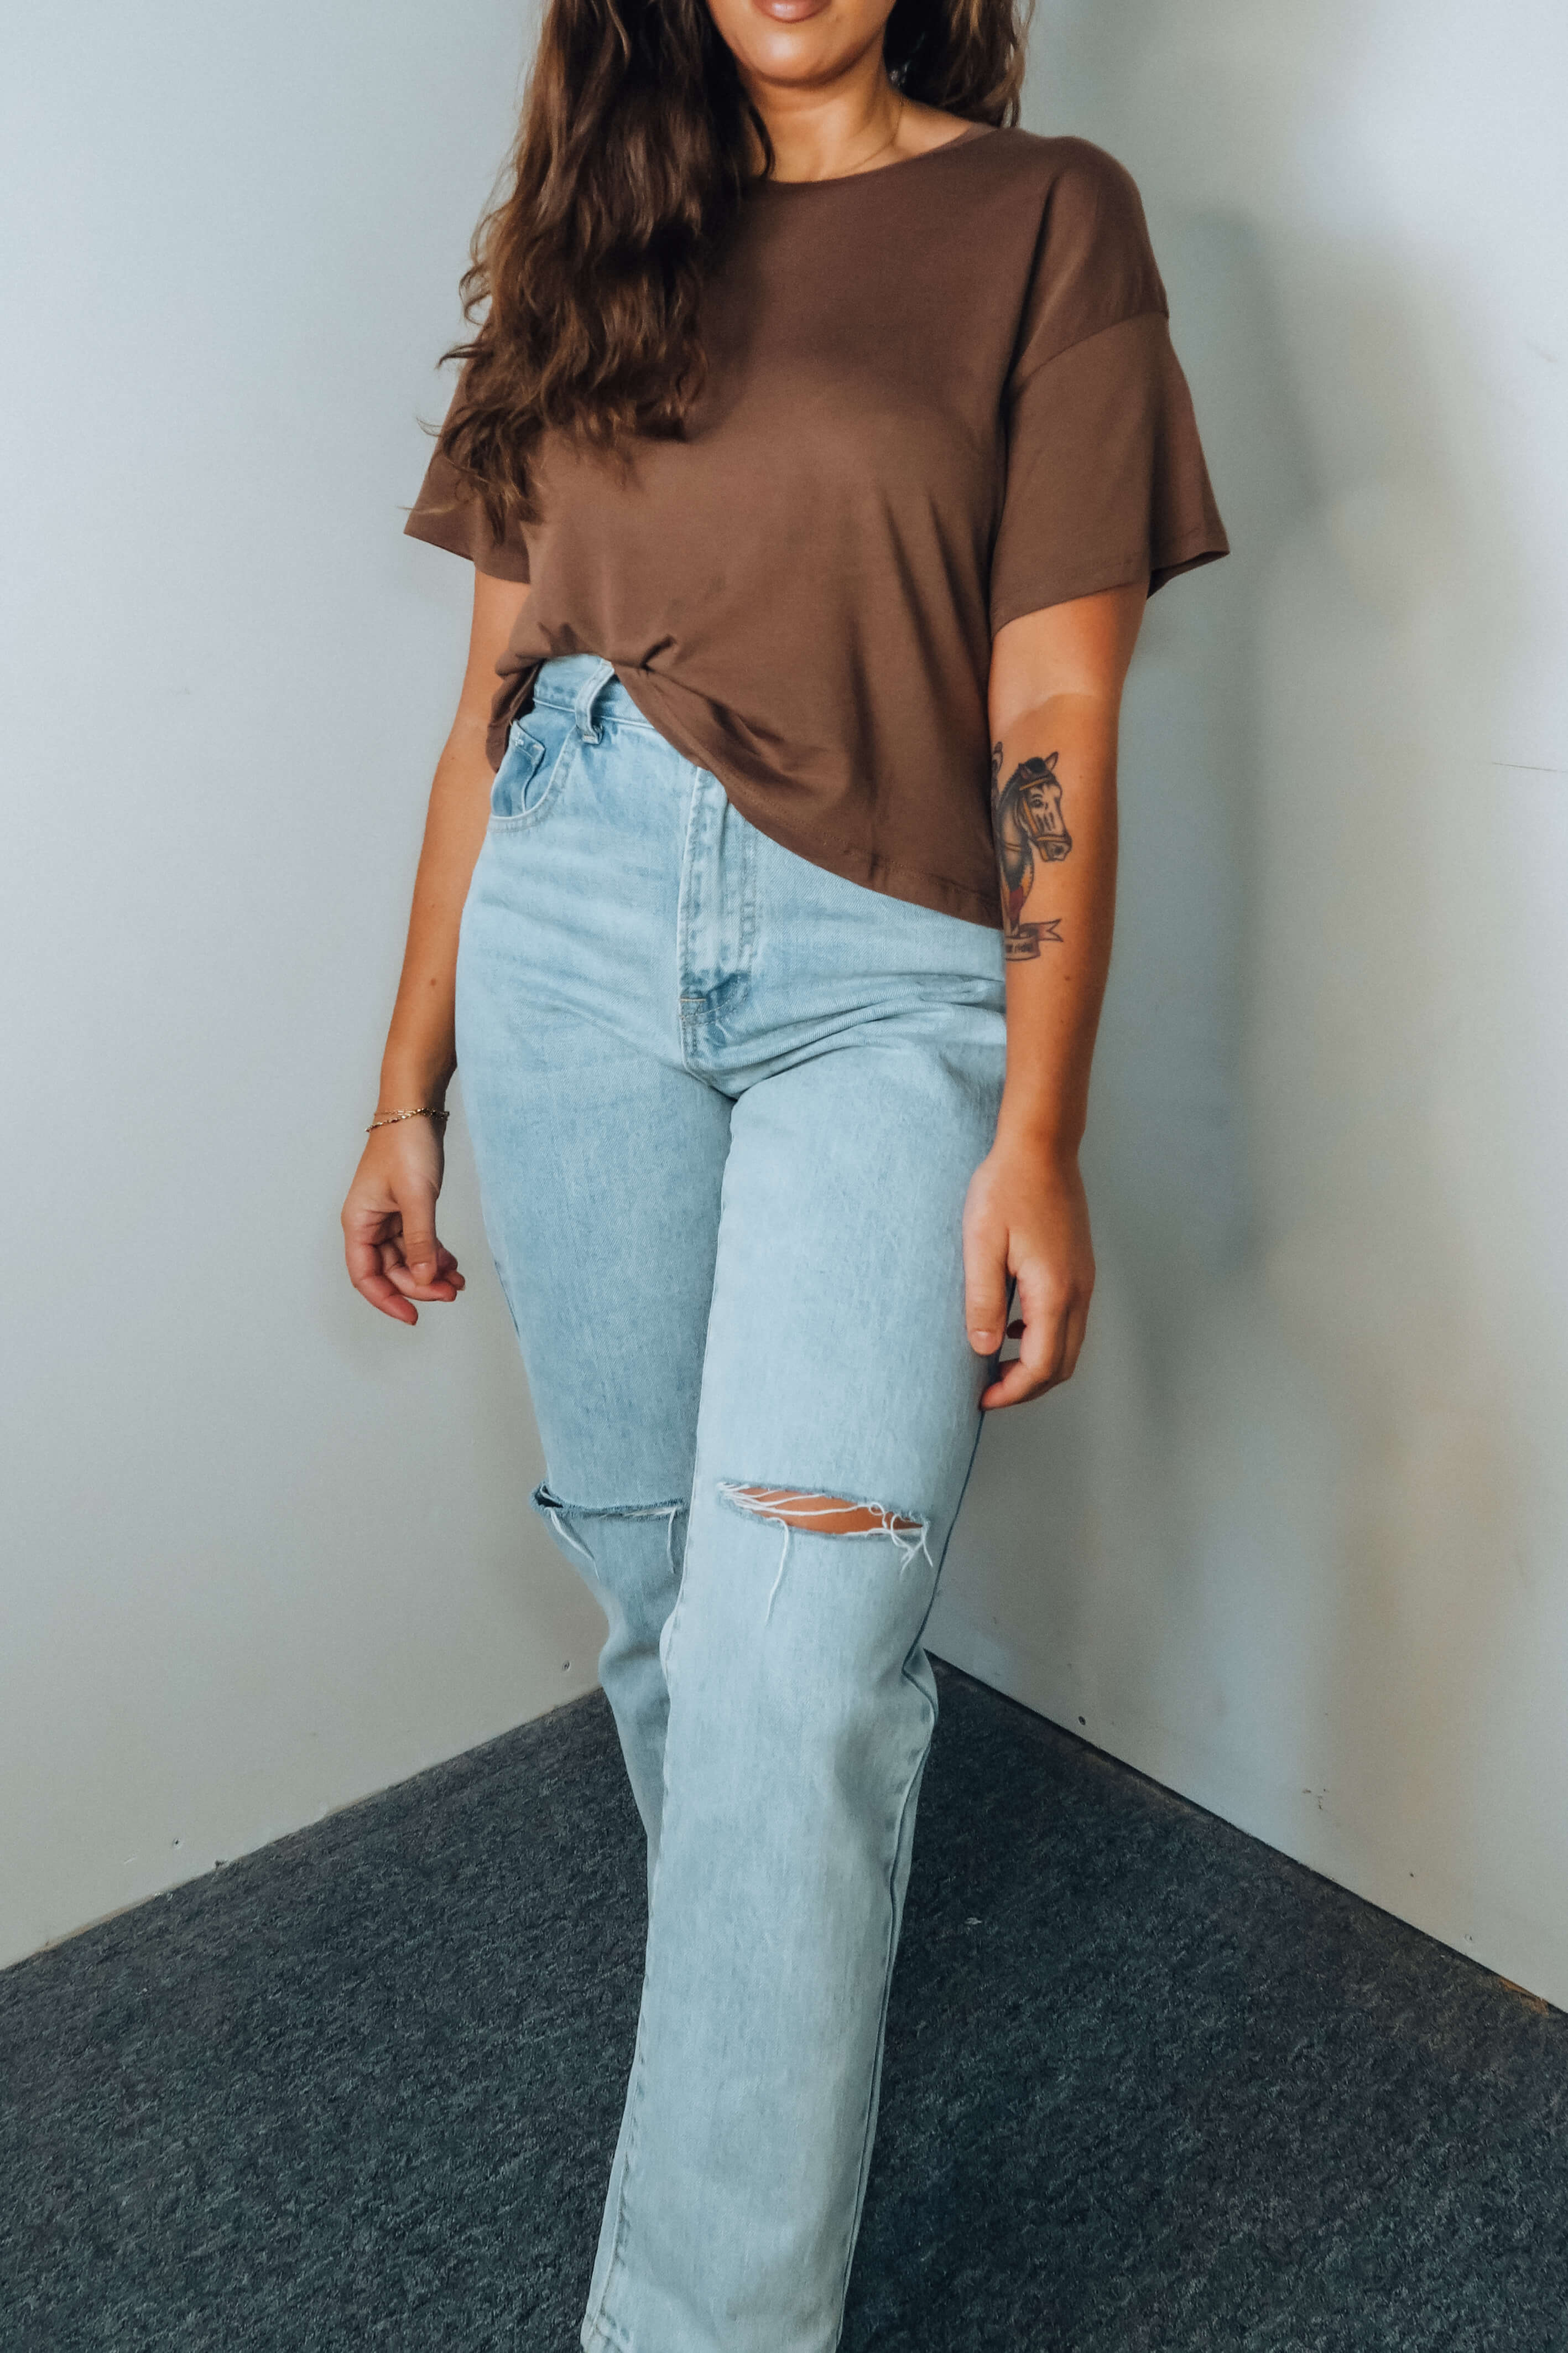 Essential Short Sleeve Oversized Crop Top - Chocolate Brown - Tops - The Green Brick Boutique